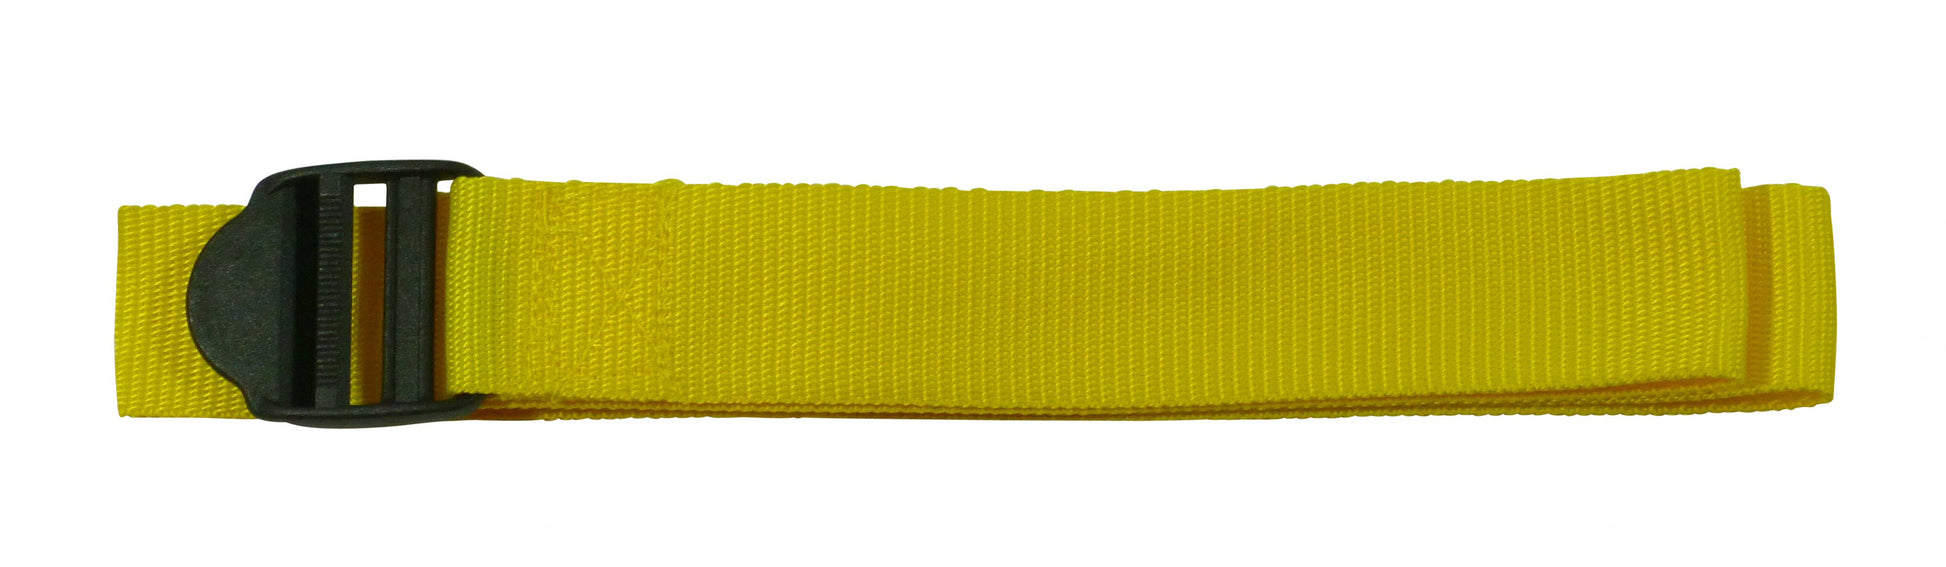 Benristraps 38mm Webbing Strap with Ladderlock Buckle in yellow